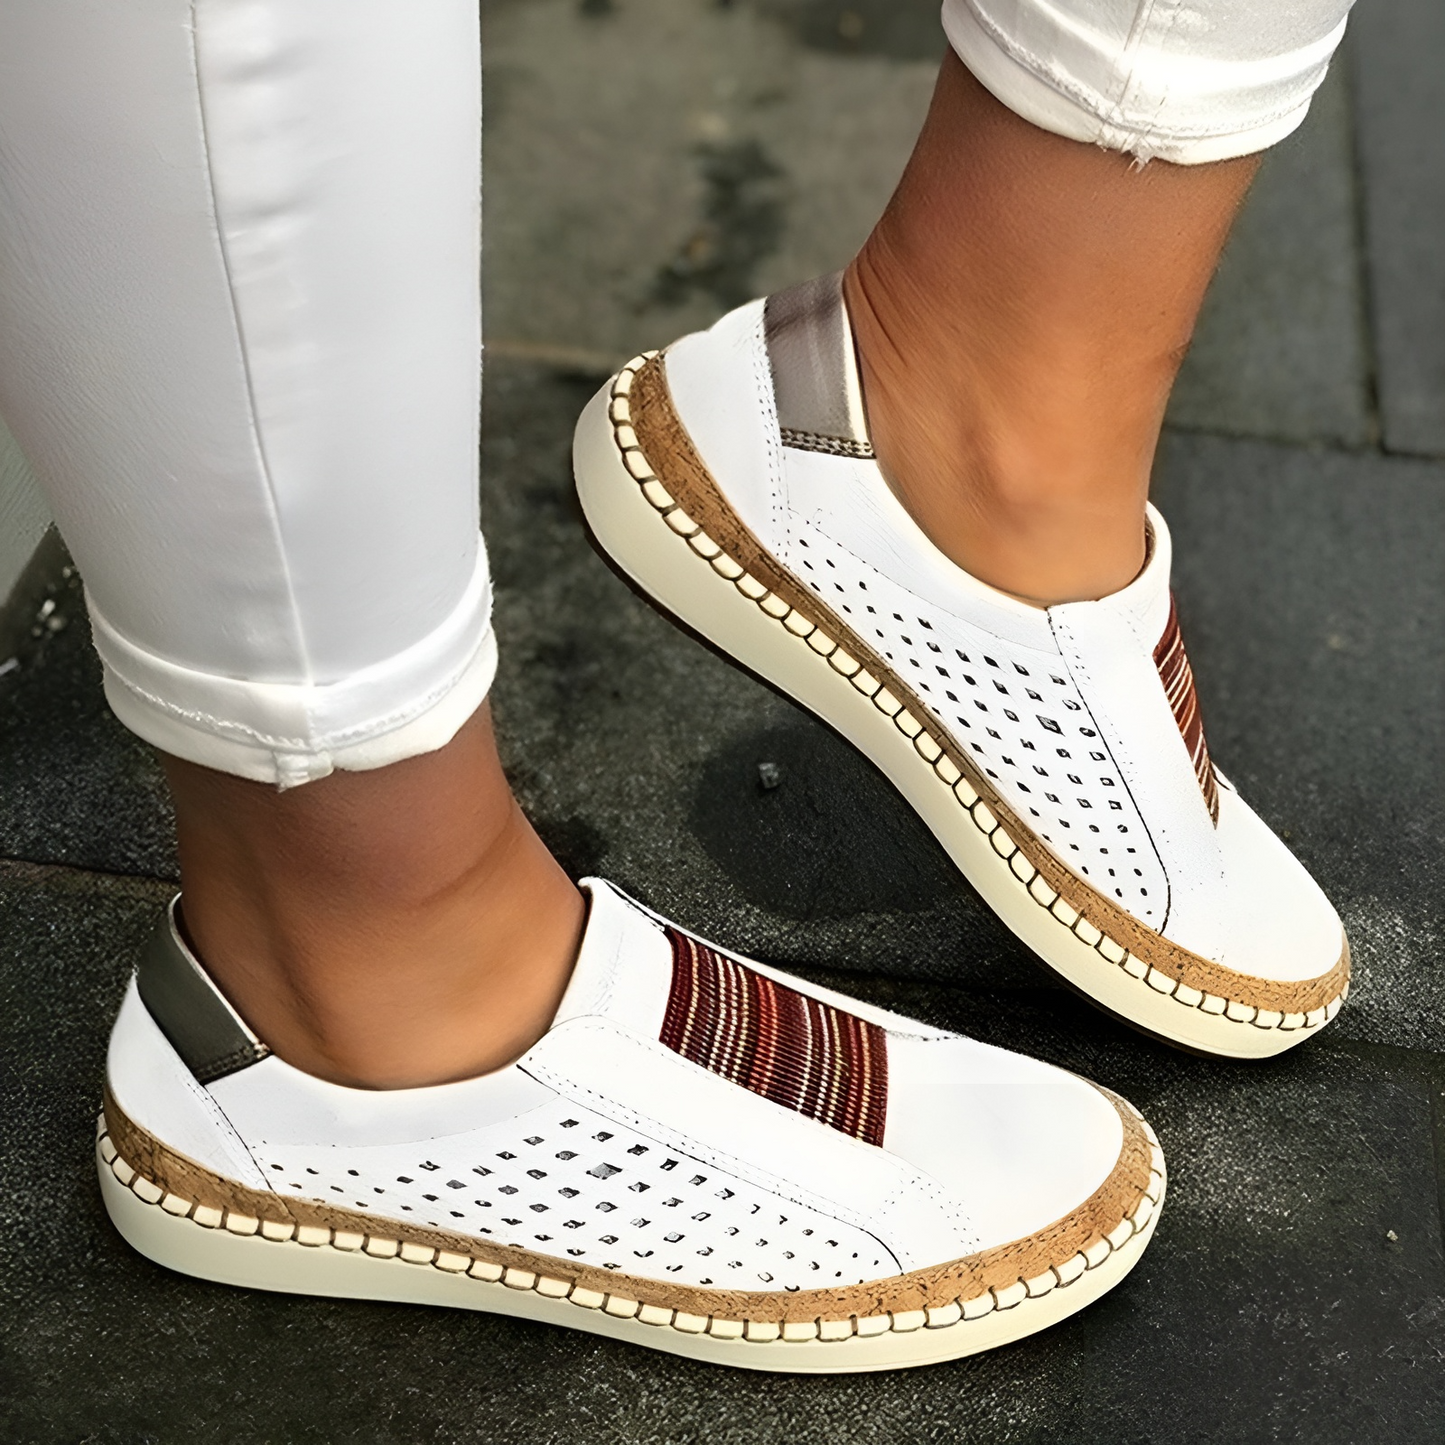 CMF Women Loafers Orthopedic Genuine Leather Flat Airy Unique Casual Shoes